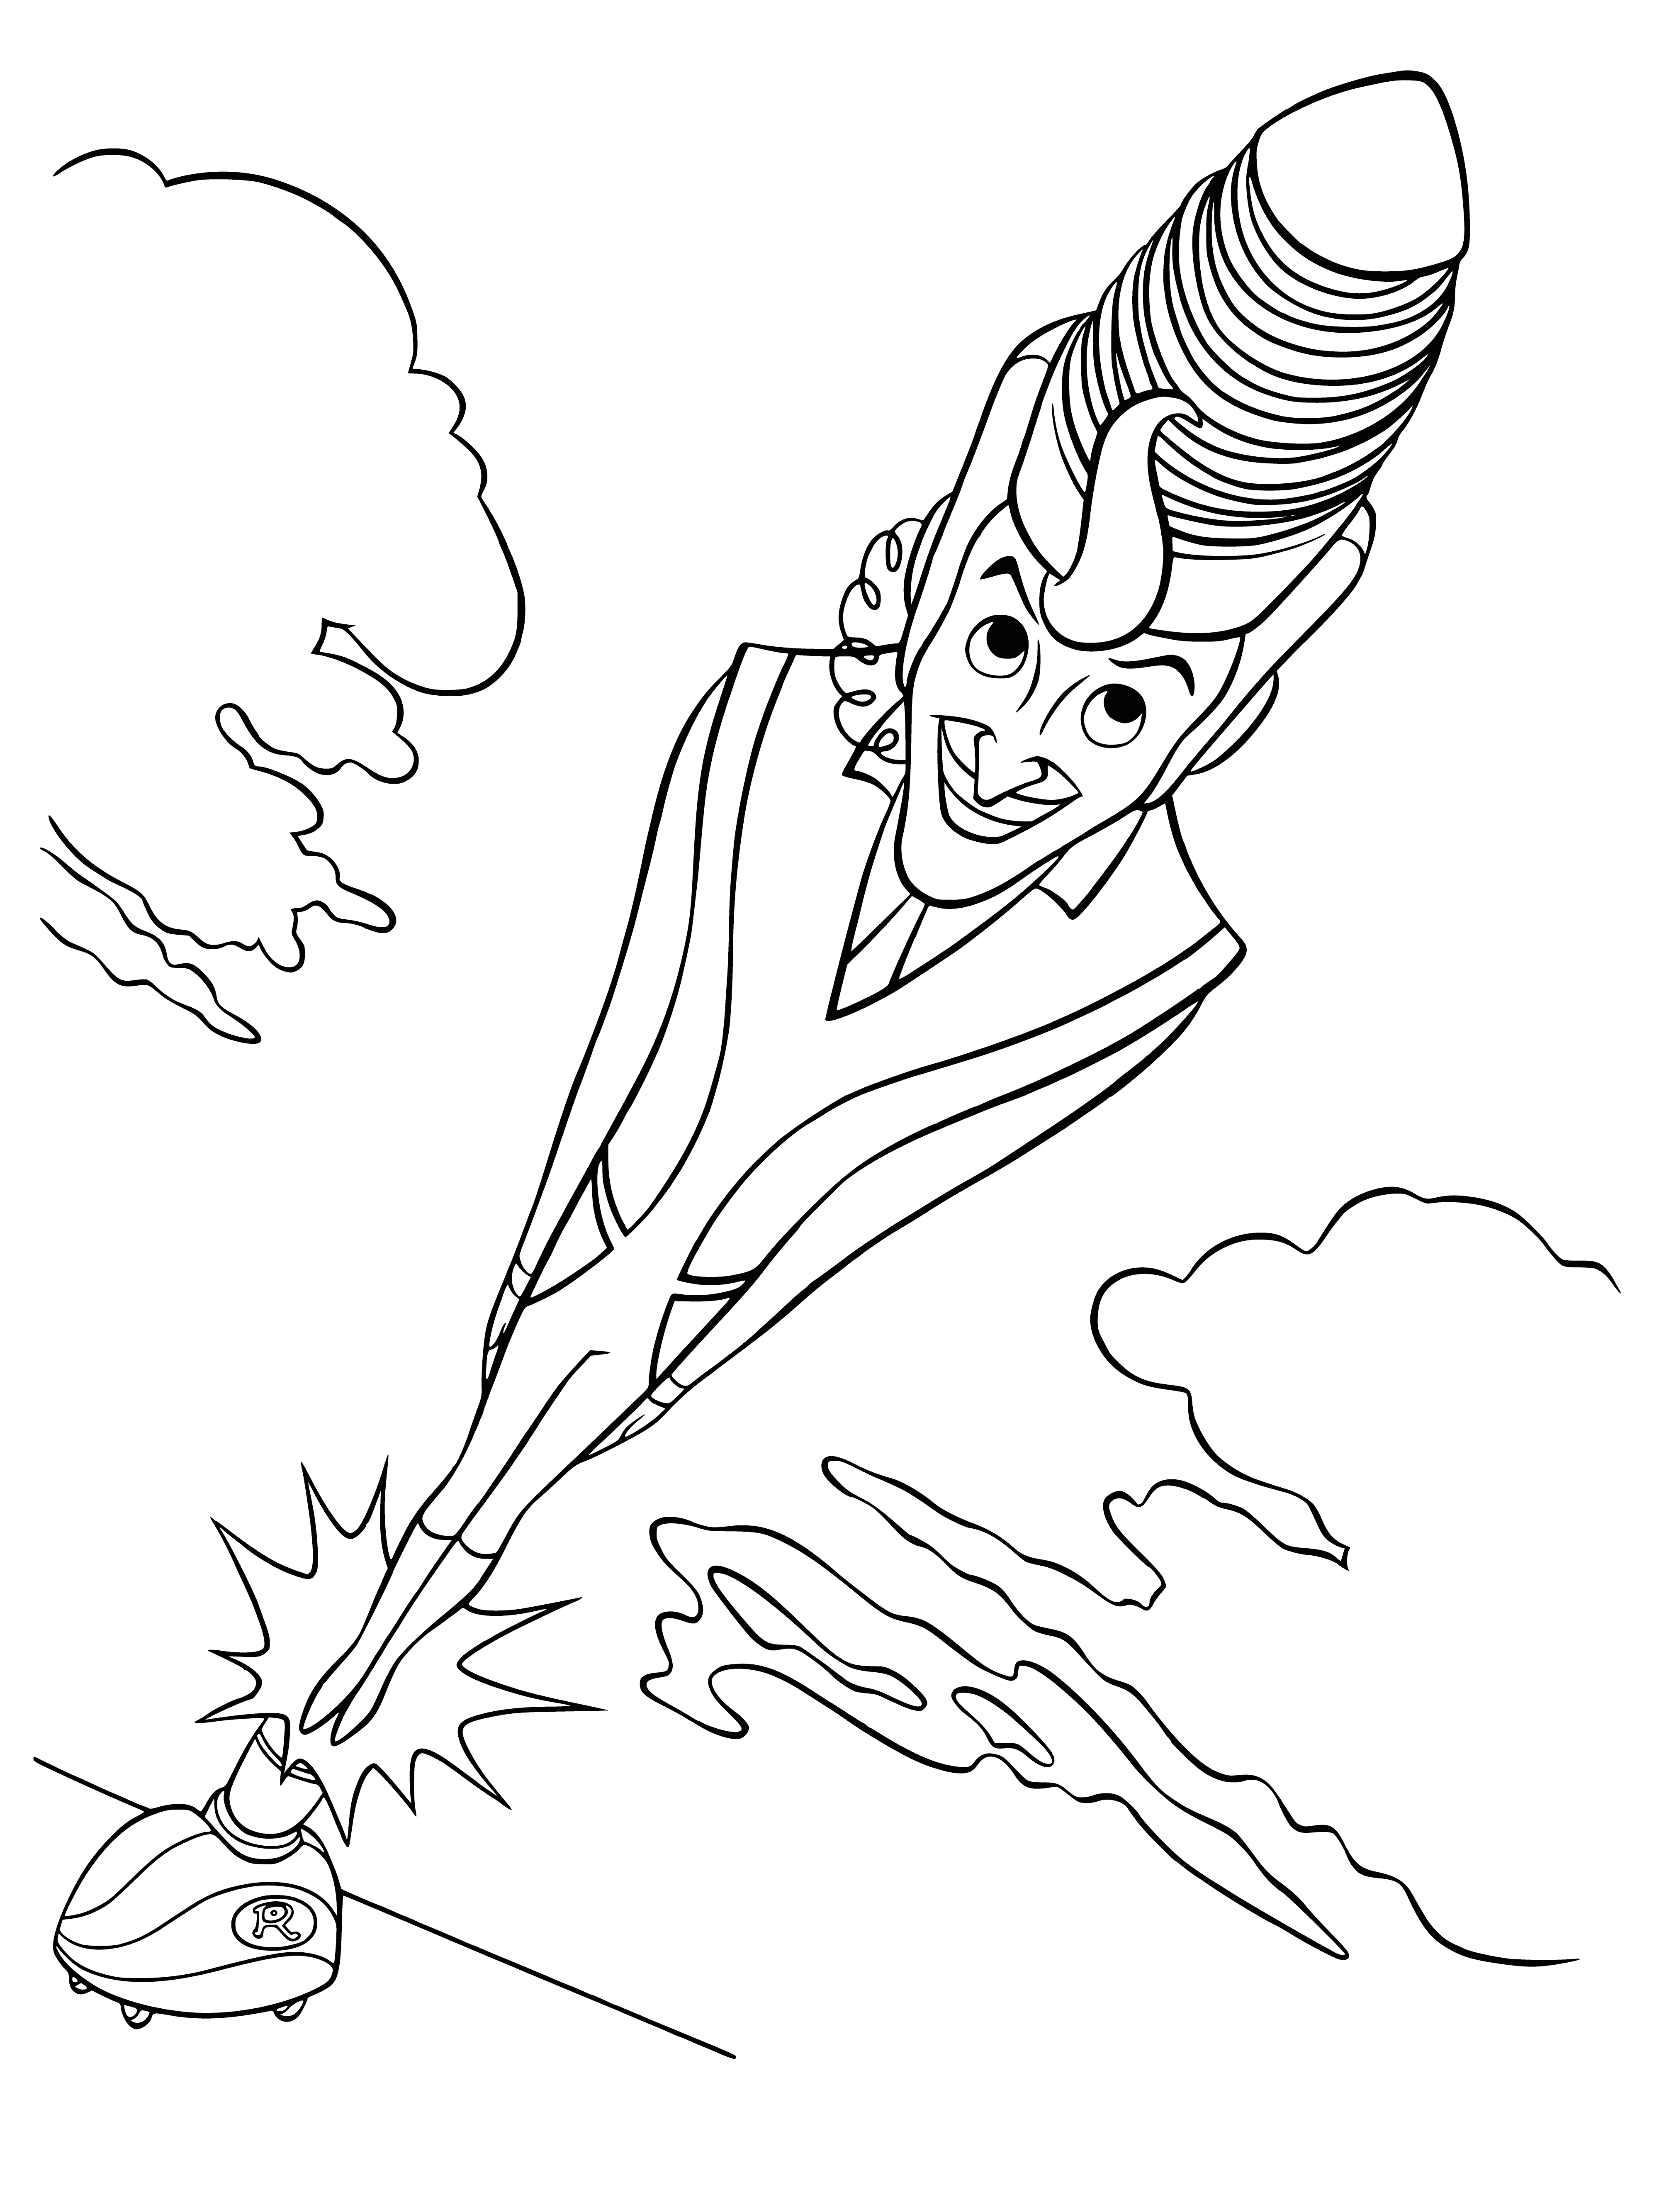 coloring page: Man wears green shirt and blue pants, has red scarf, holds black device with blue light.